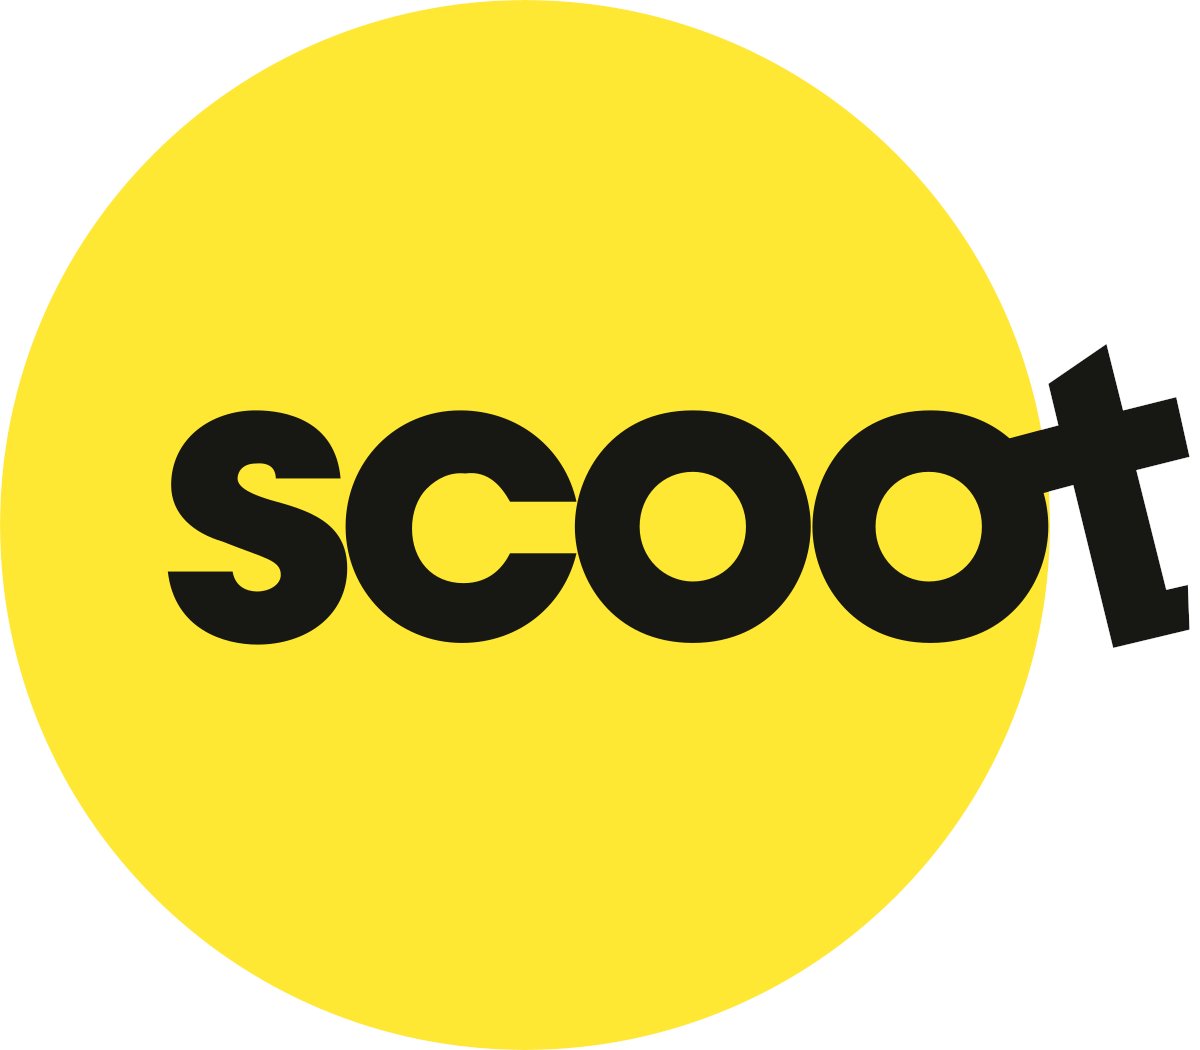 Scoot7/10, cool that singapore has its own version of spirit airlines